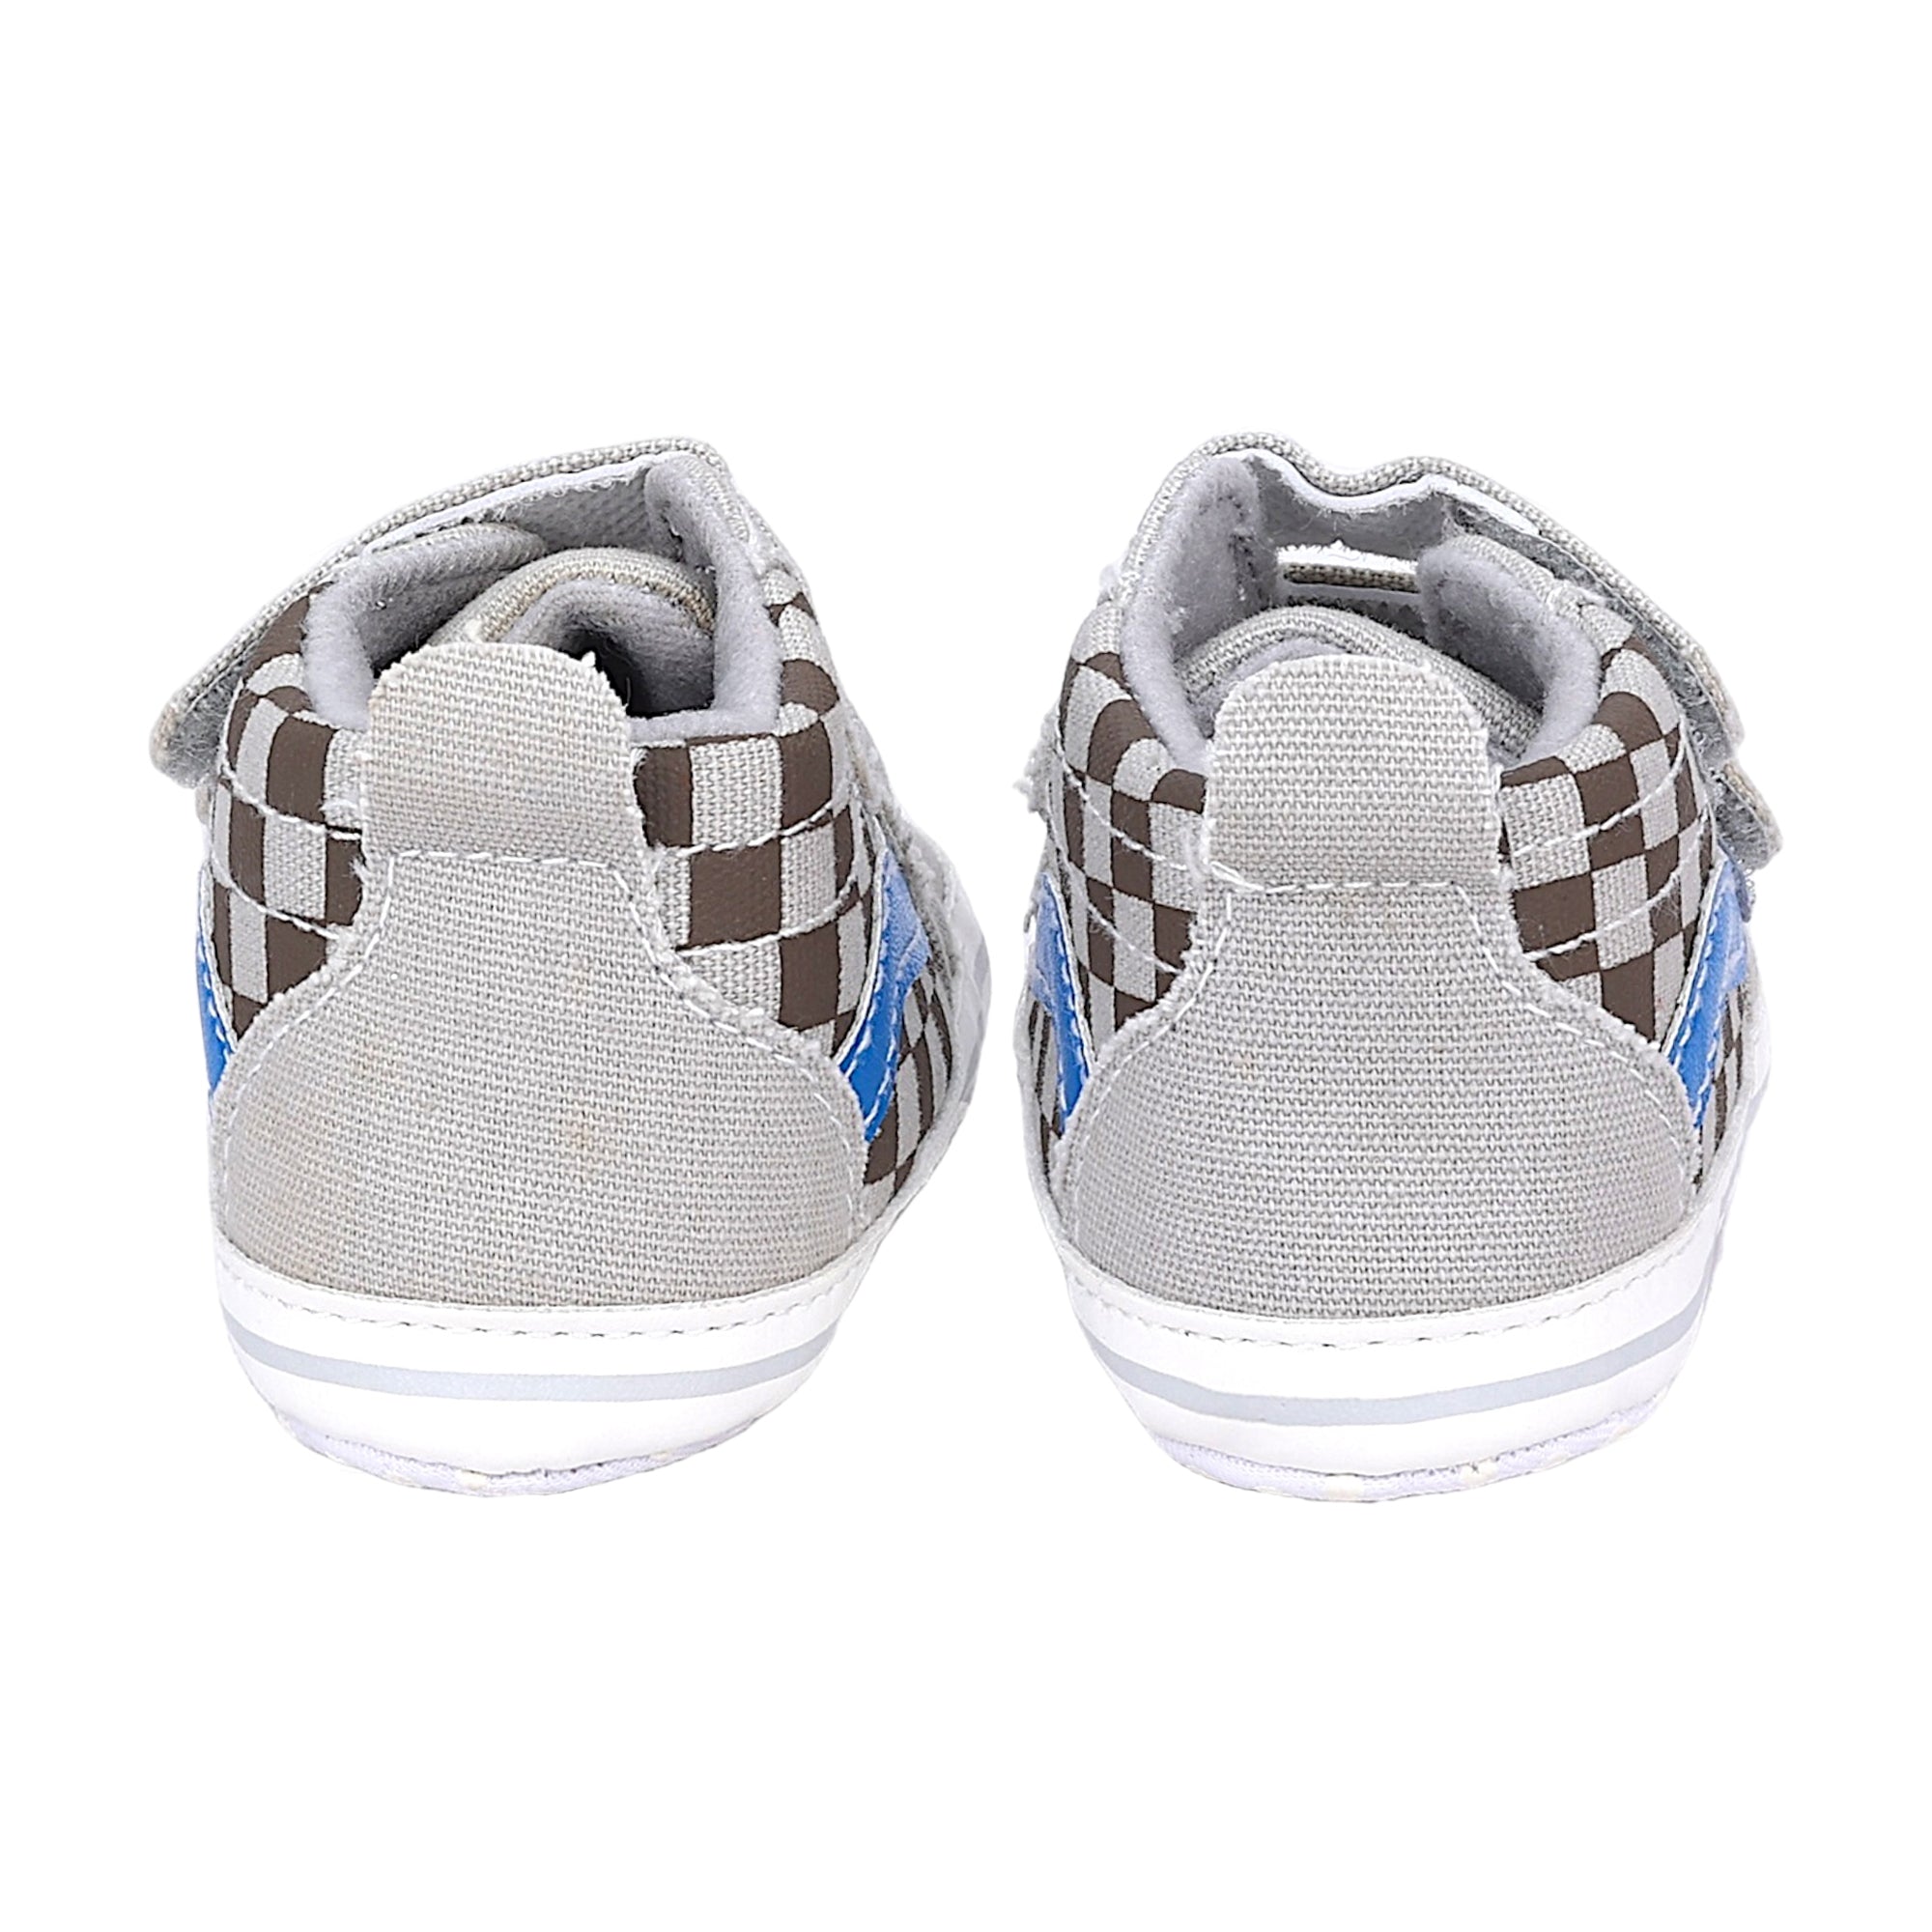 Baby Moo Stylish Casual Velcro Straps Anti-Skid Sneakers - Grey